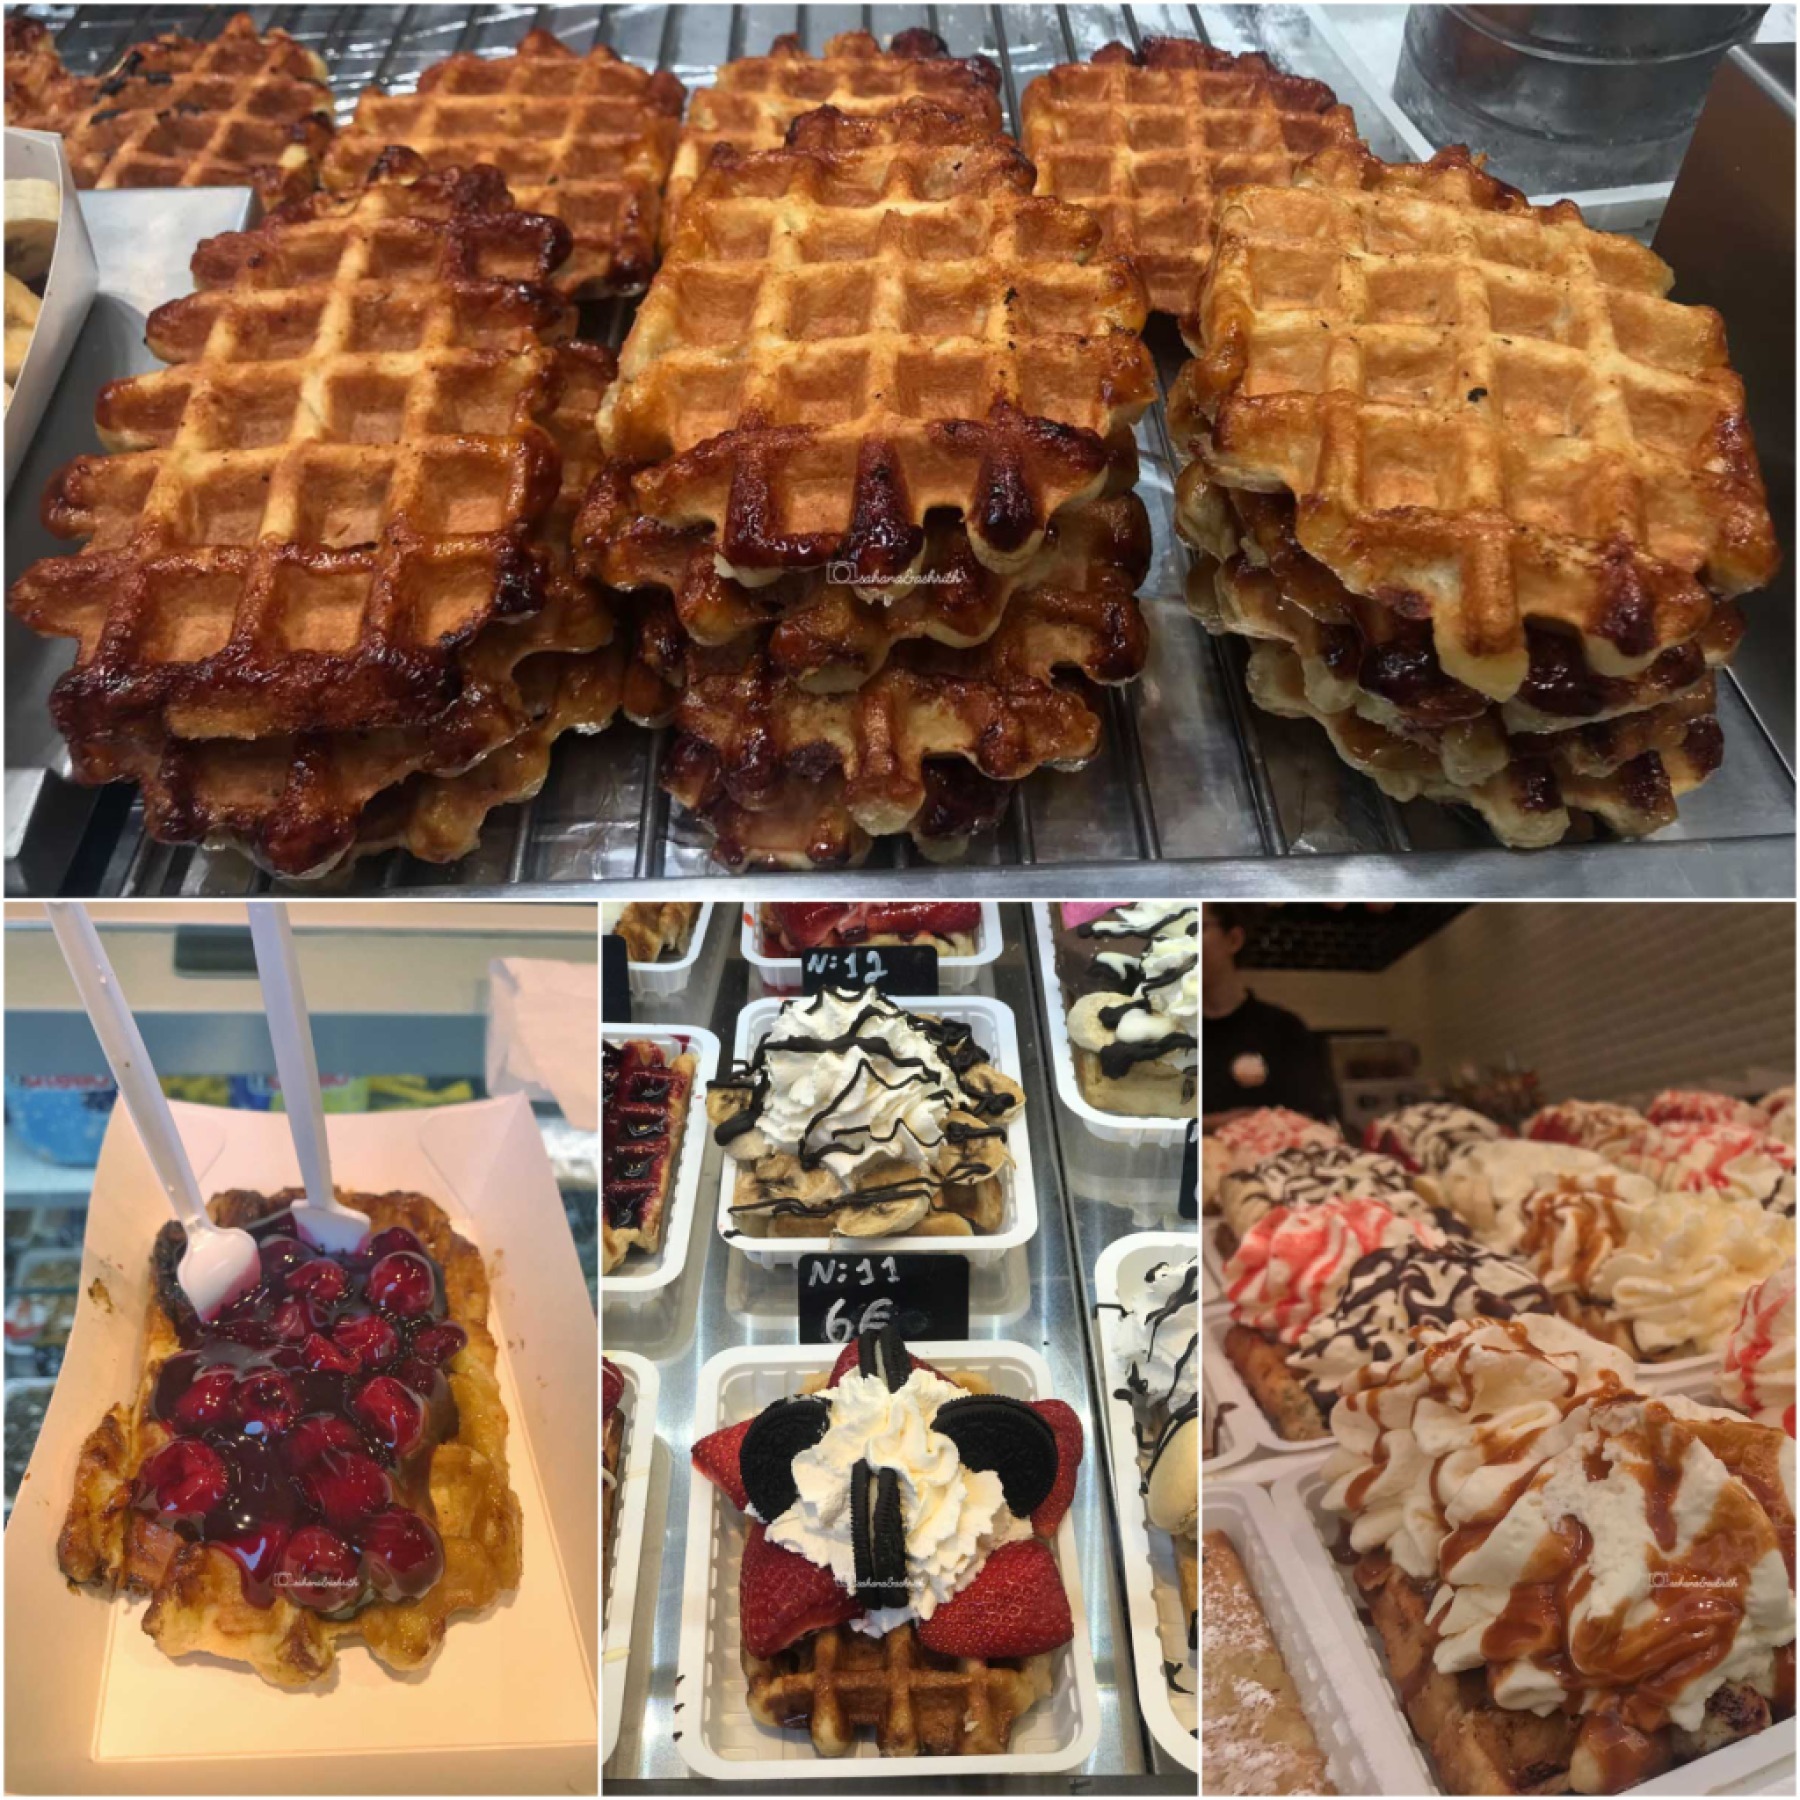 Belgian waffles with various toppings and creams